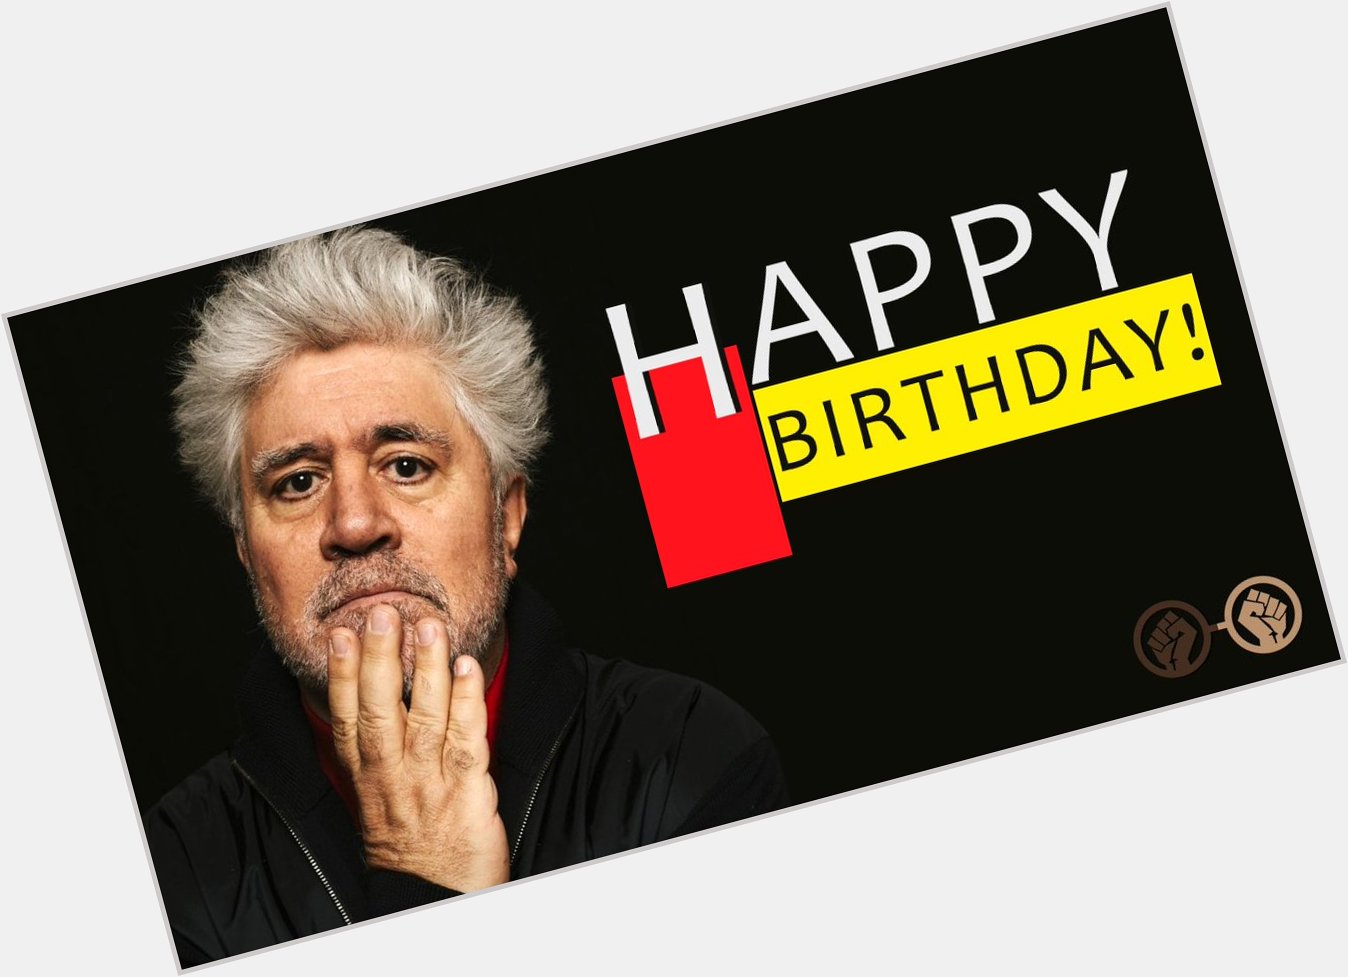 Happy birthday, Pedro Almodovar! The Spanish director turns 69 today. We hope he\s having a good day. 